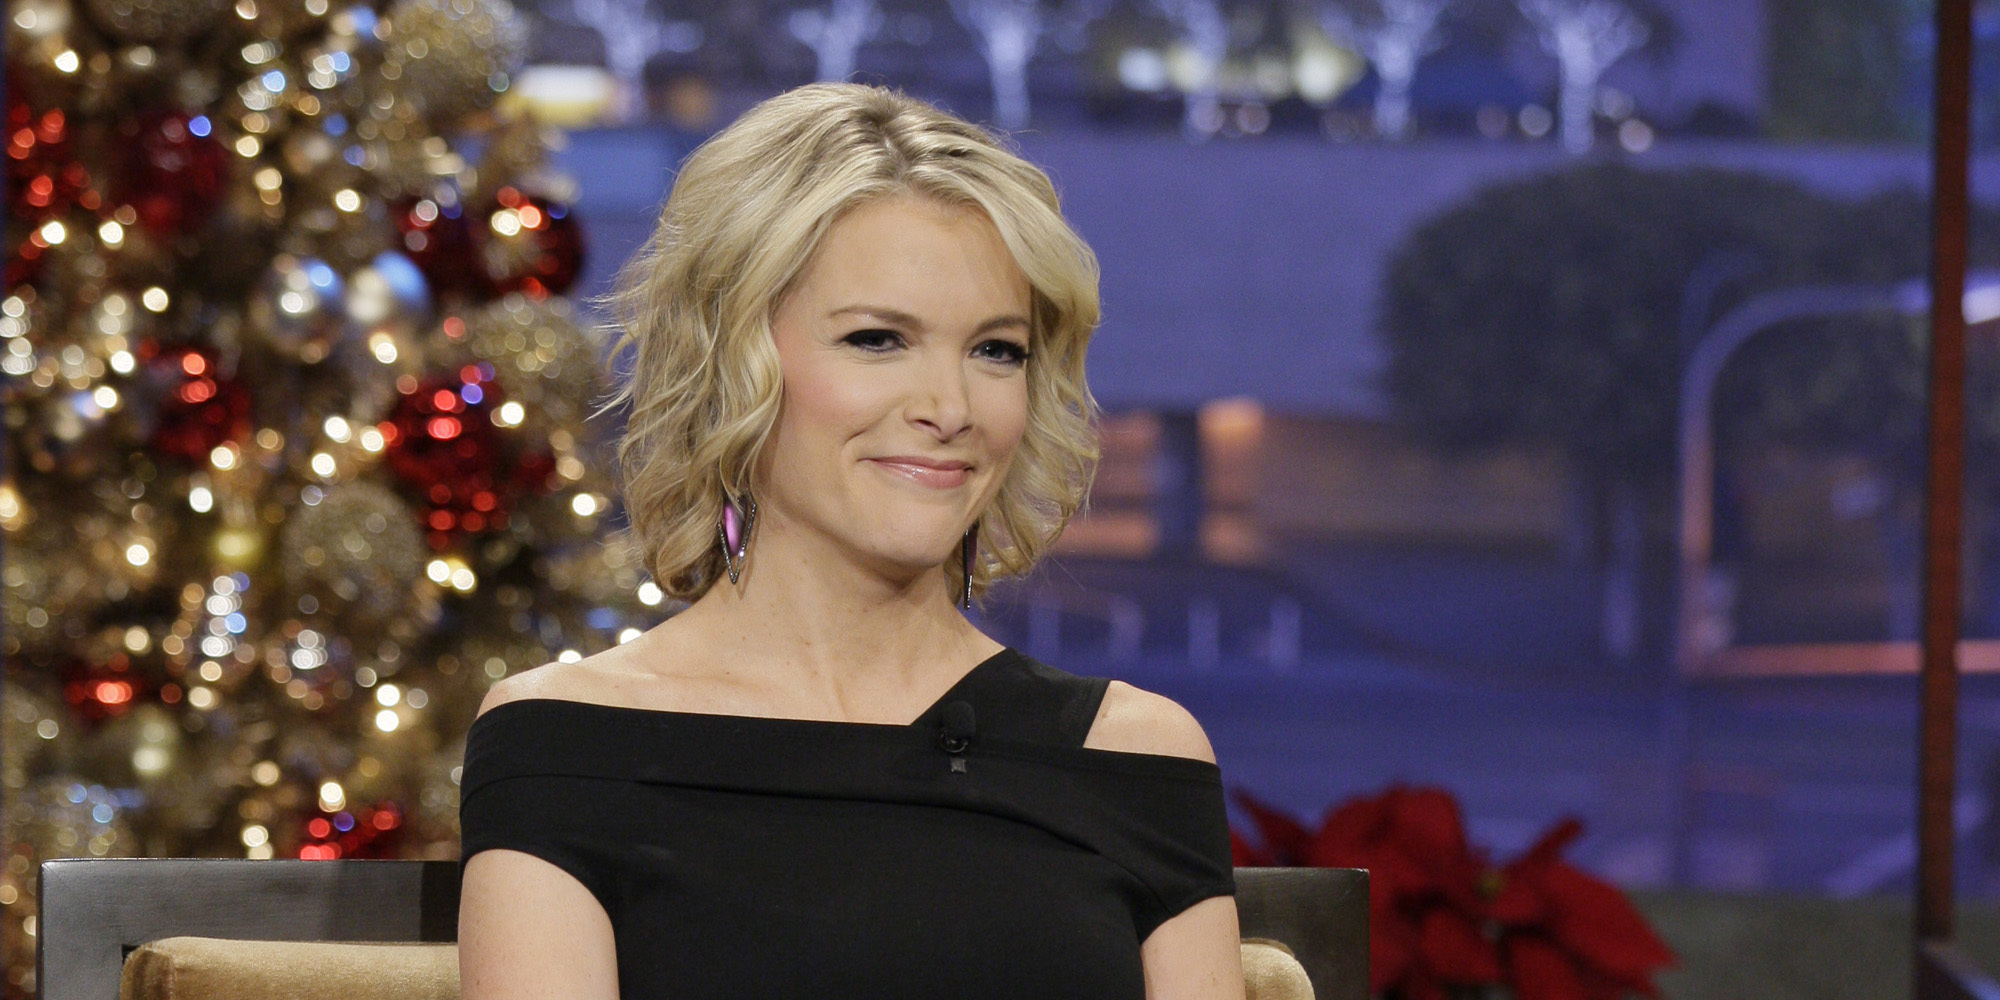 Megyn Kelly Wallpapers and Background Images   stmednet